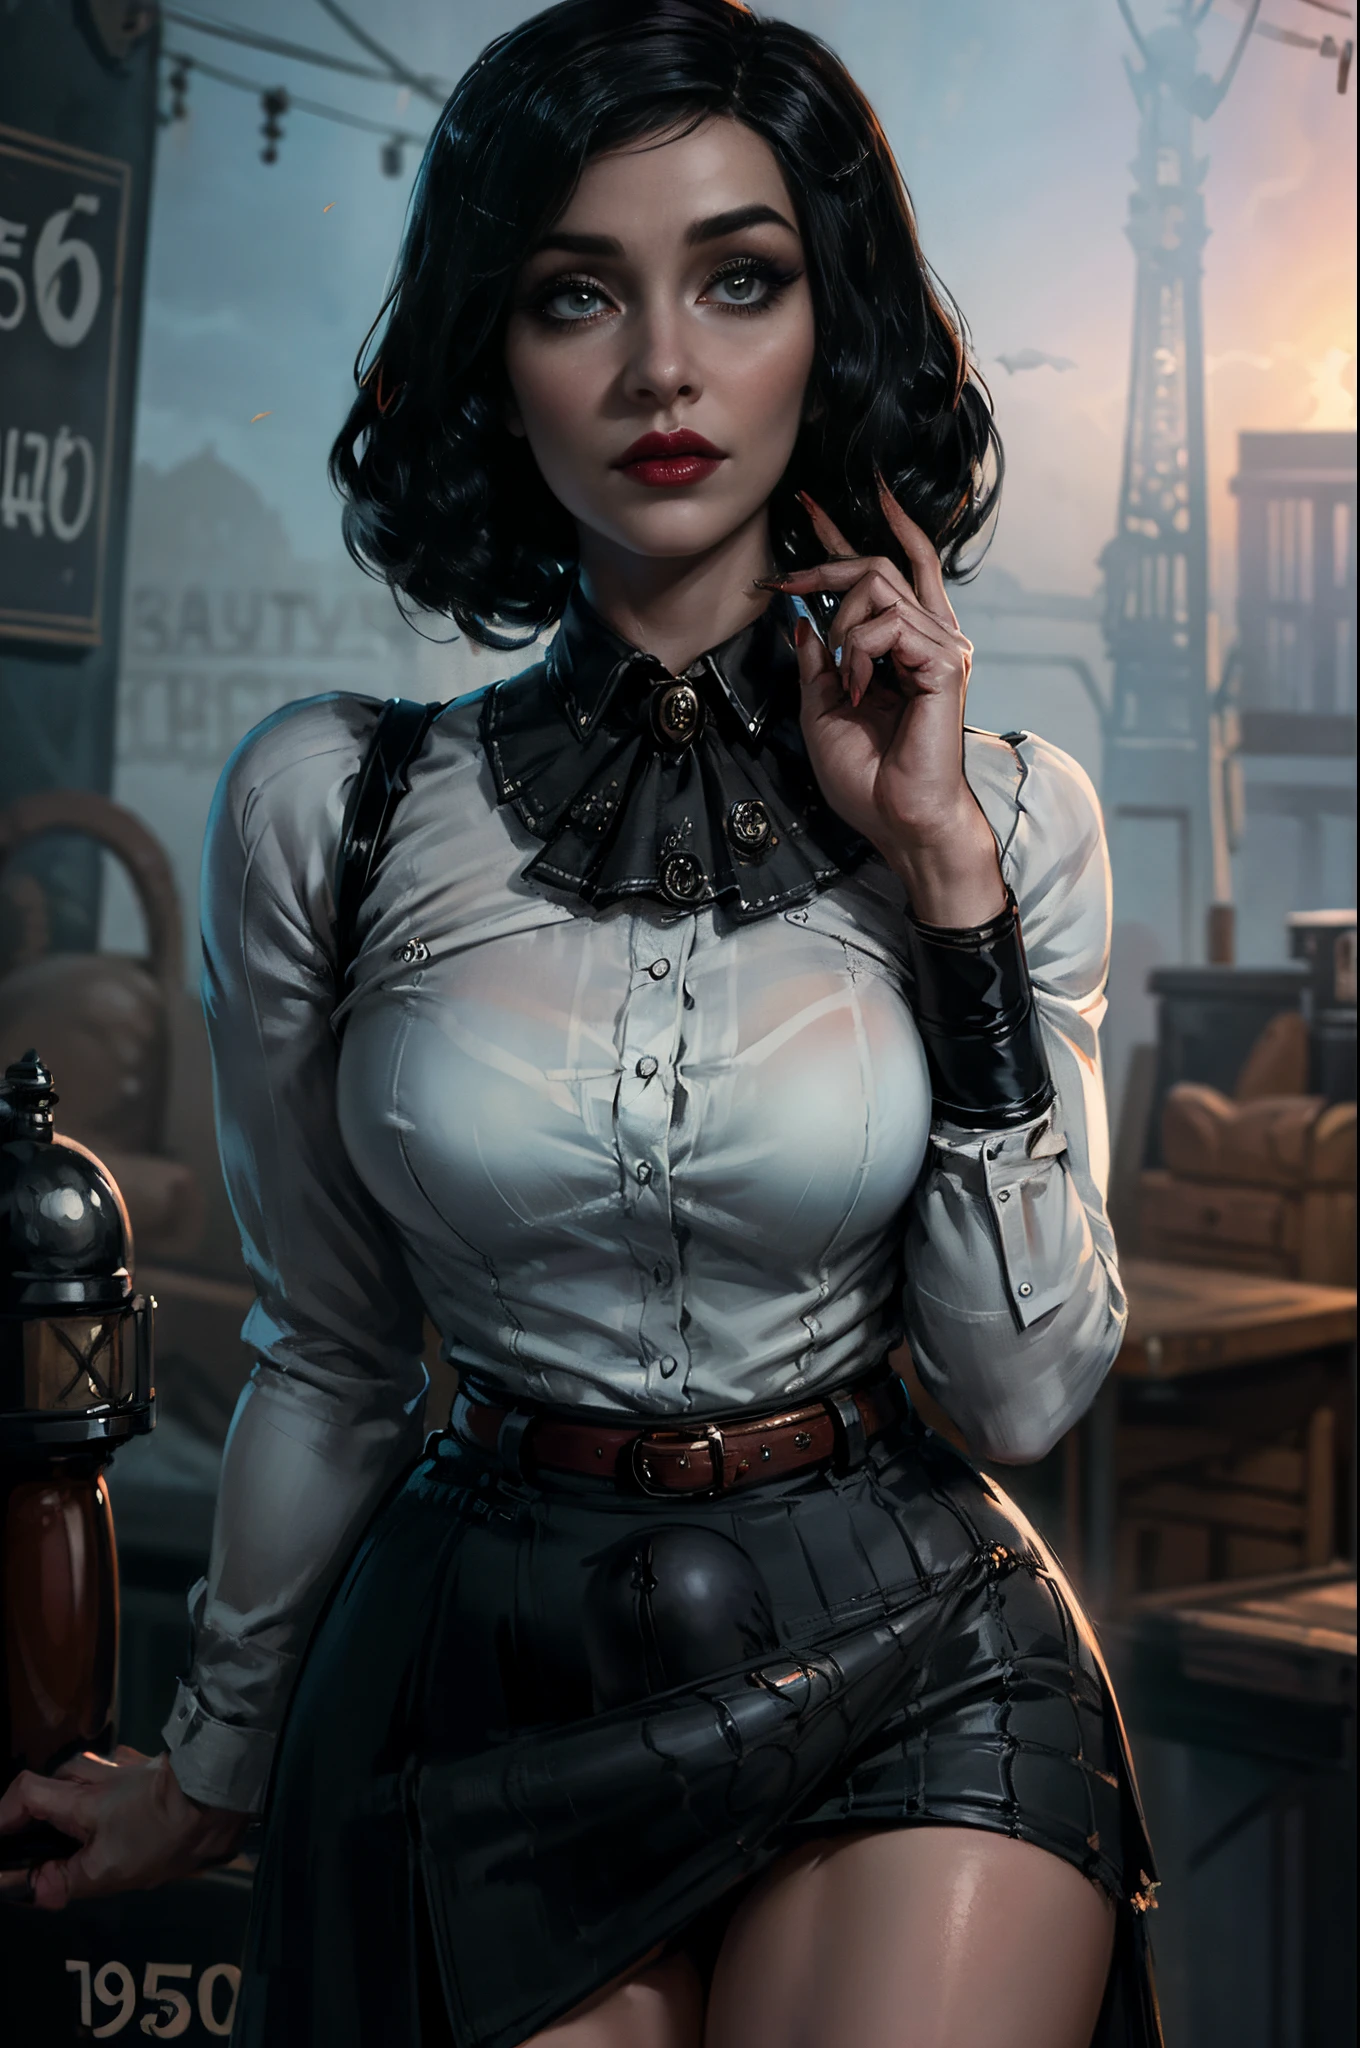 ( there is a woman holding a cigarette in her hand ),( Elizabeth from Burial at Sea ) (realistic:1.5), (fully dressed), ((female in 1950 hair short hair style a white long-sleeved blouse, her bird cameo, a black knee-length tight fitted skirt with a red belt, fishnet stockings and black heels with an ankle strap. Her hairstyle is brushed out pin curls and she wears make-up. )), (long black skirt:1.2) (white shirt:1.2) (masterpiece), (specular lighting:1.3), (hyperrealistic:1.2), (photorealistic face:1.2), (perfect face), (perfect eyeest quality), (there is a woman holding a cigarette in her hand, elizabeth from bioshock Burial at Sea, dramatic smoking pose, epic and classy portrait, beautiful , with smoke, cigarette, bioshock steampunk portrait ), (4k), sharp focus, octane render, best quality, extremely detailed, intricate, fantasy, soft lighting, (curvy:1.3), ( big eyes :1.3), (futanari:1.2), thick eyelashes, long eyelashes, ( slim ), smile, ((1950:1.5)), ( red lips, long eyelashes, mascara, eyeliner, eyeshadow, makeupt:1.3), cosy, looking at viewer, detailed skin , zfuta futanari, (bulge:1.4)